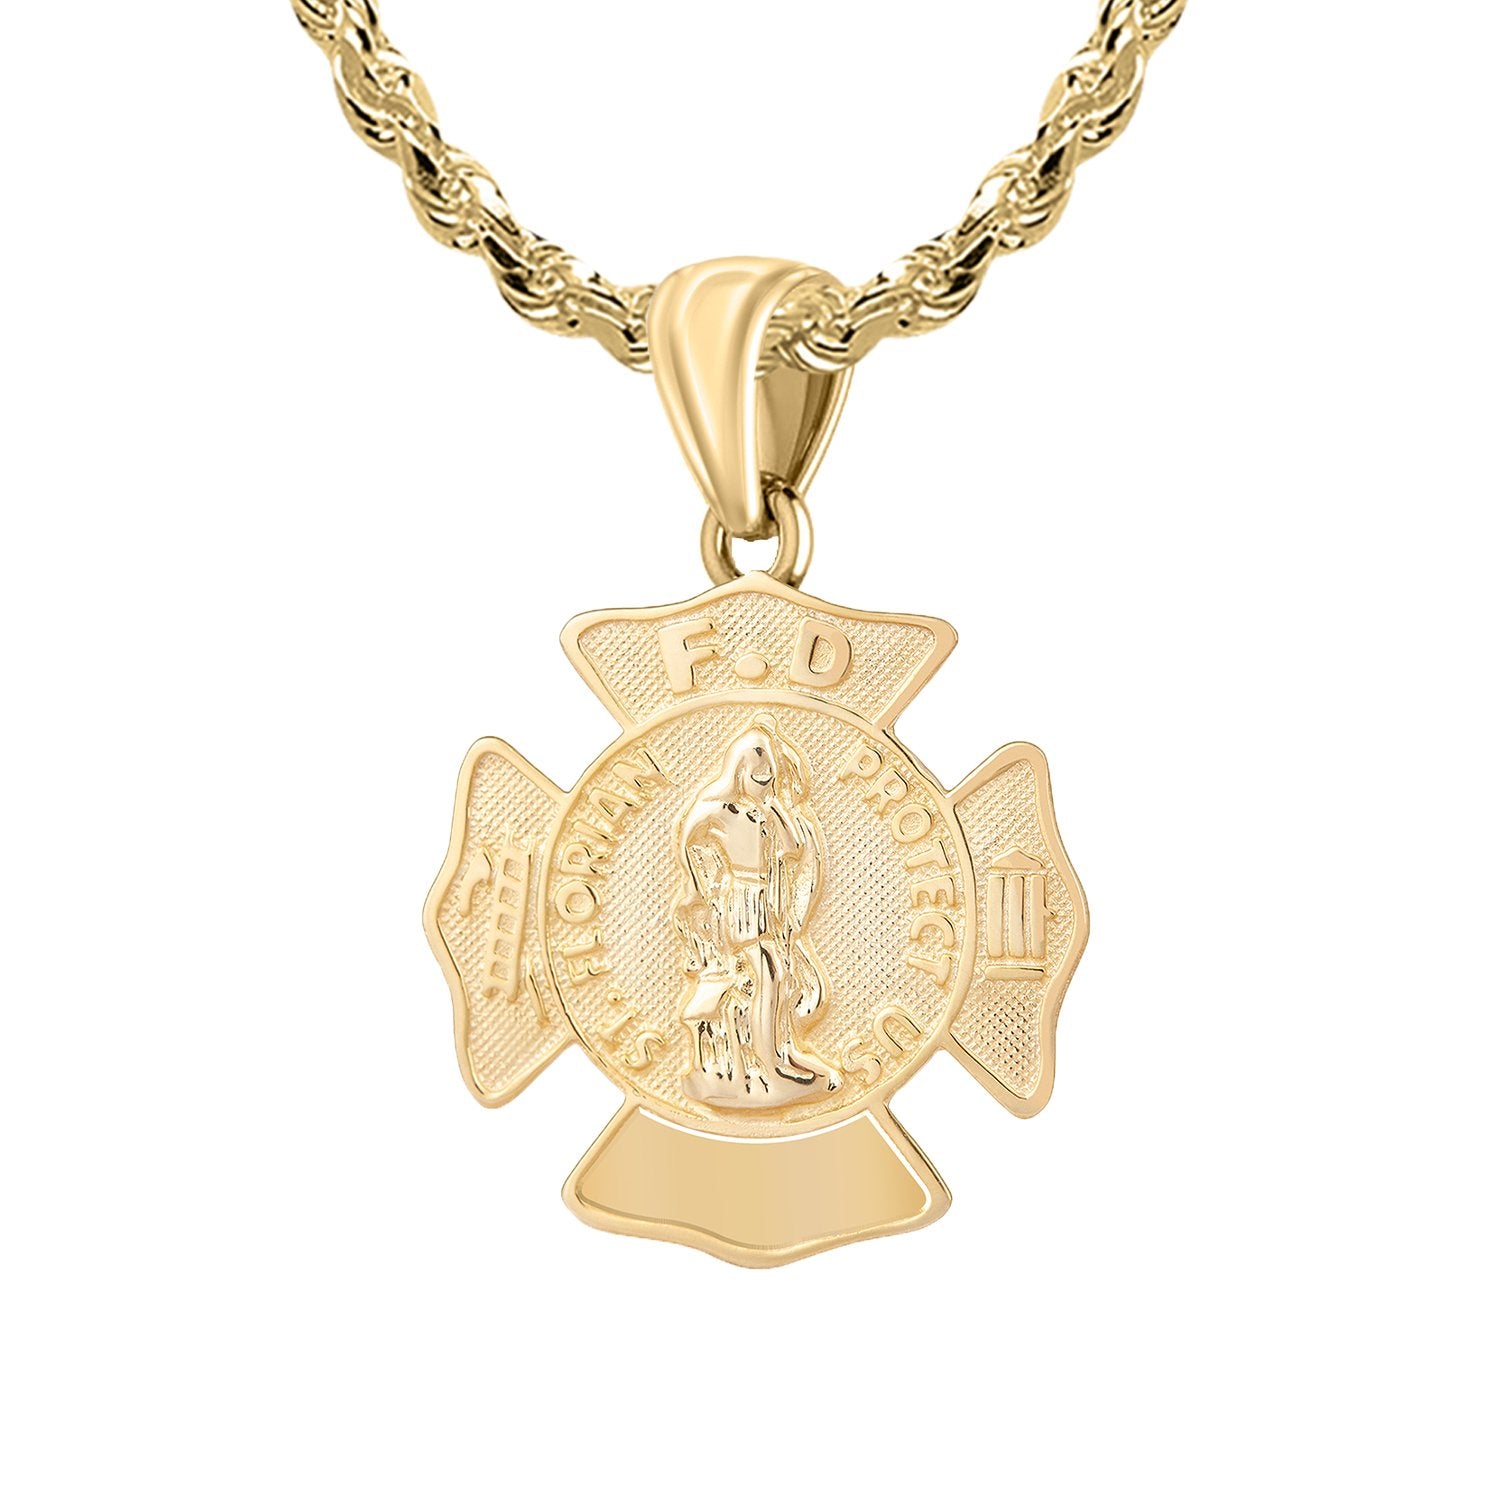 Firefighter Pendant In Gold With Chain - 2.5mm Rope Chain